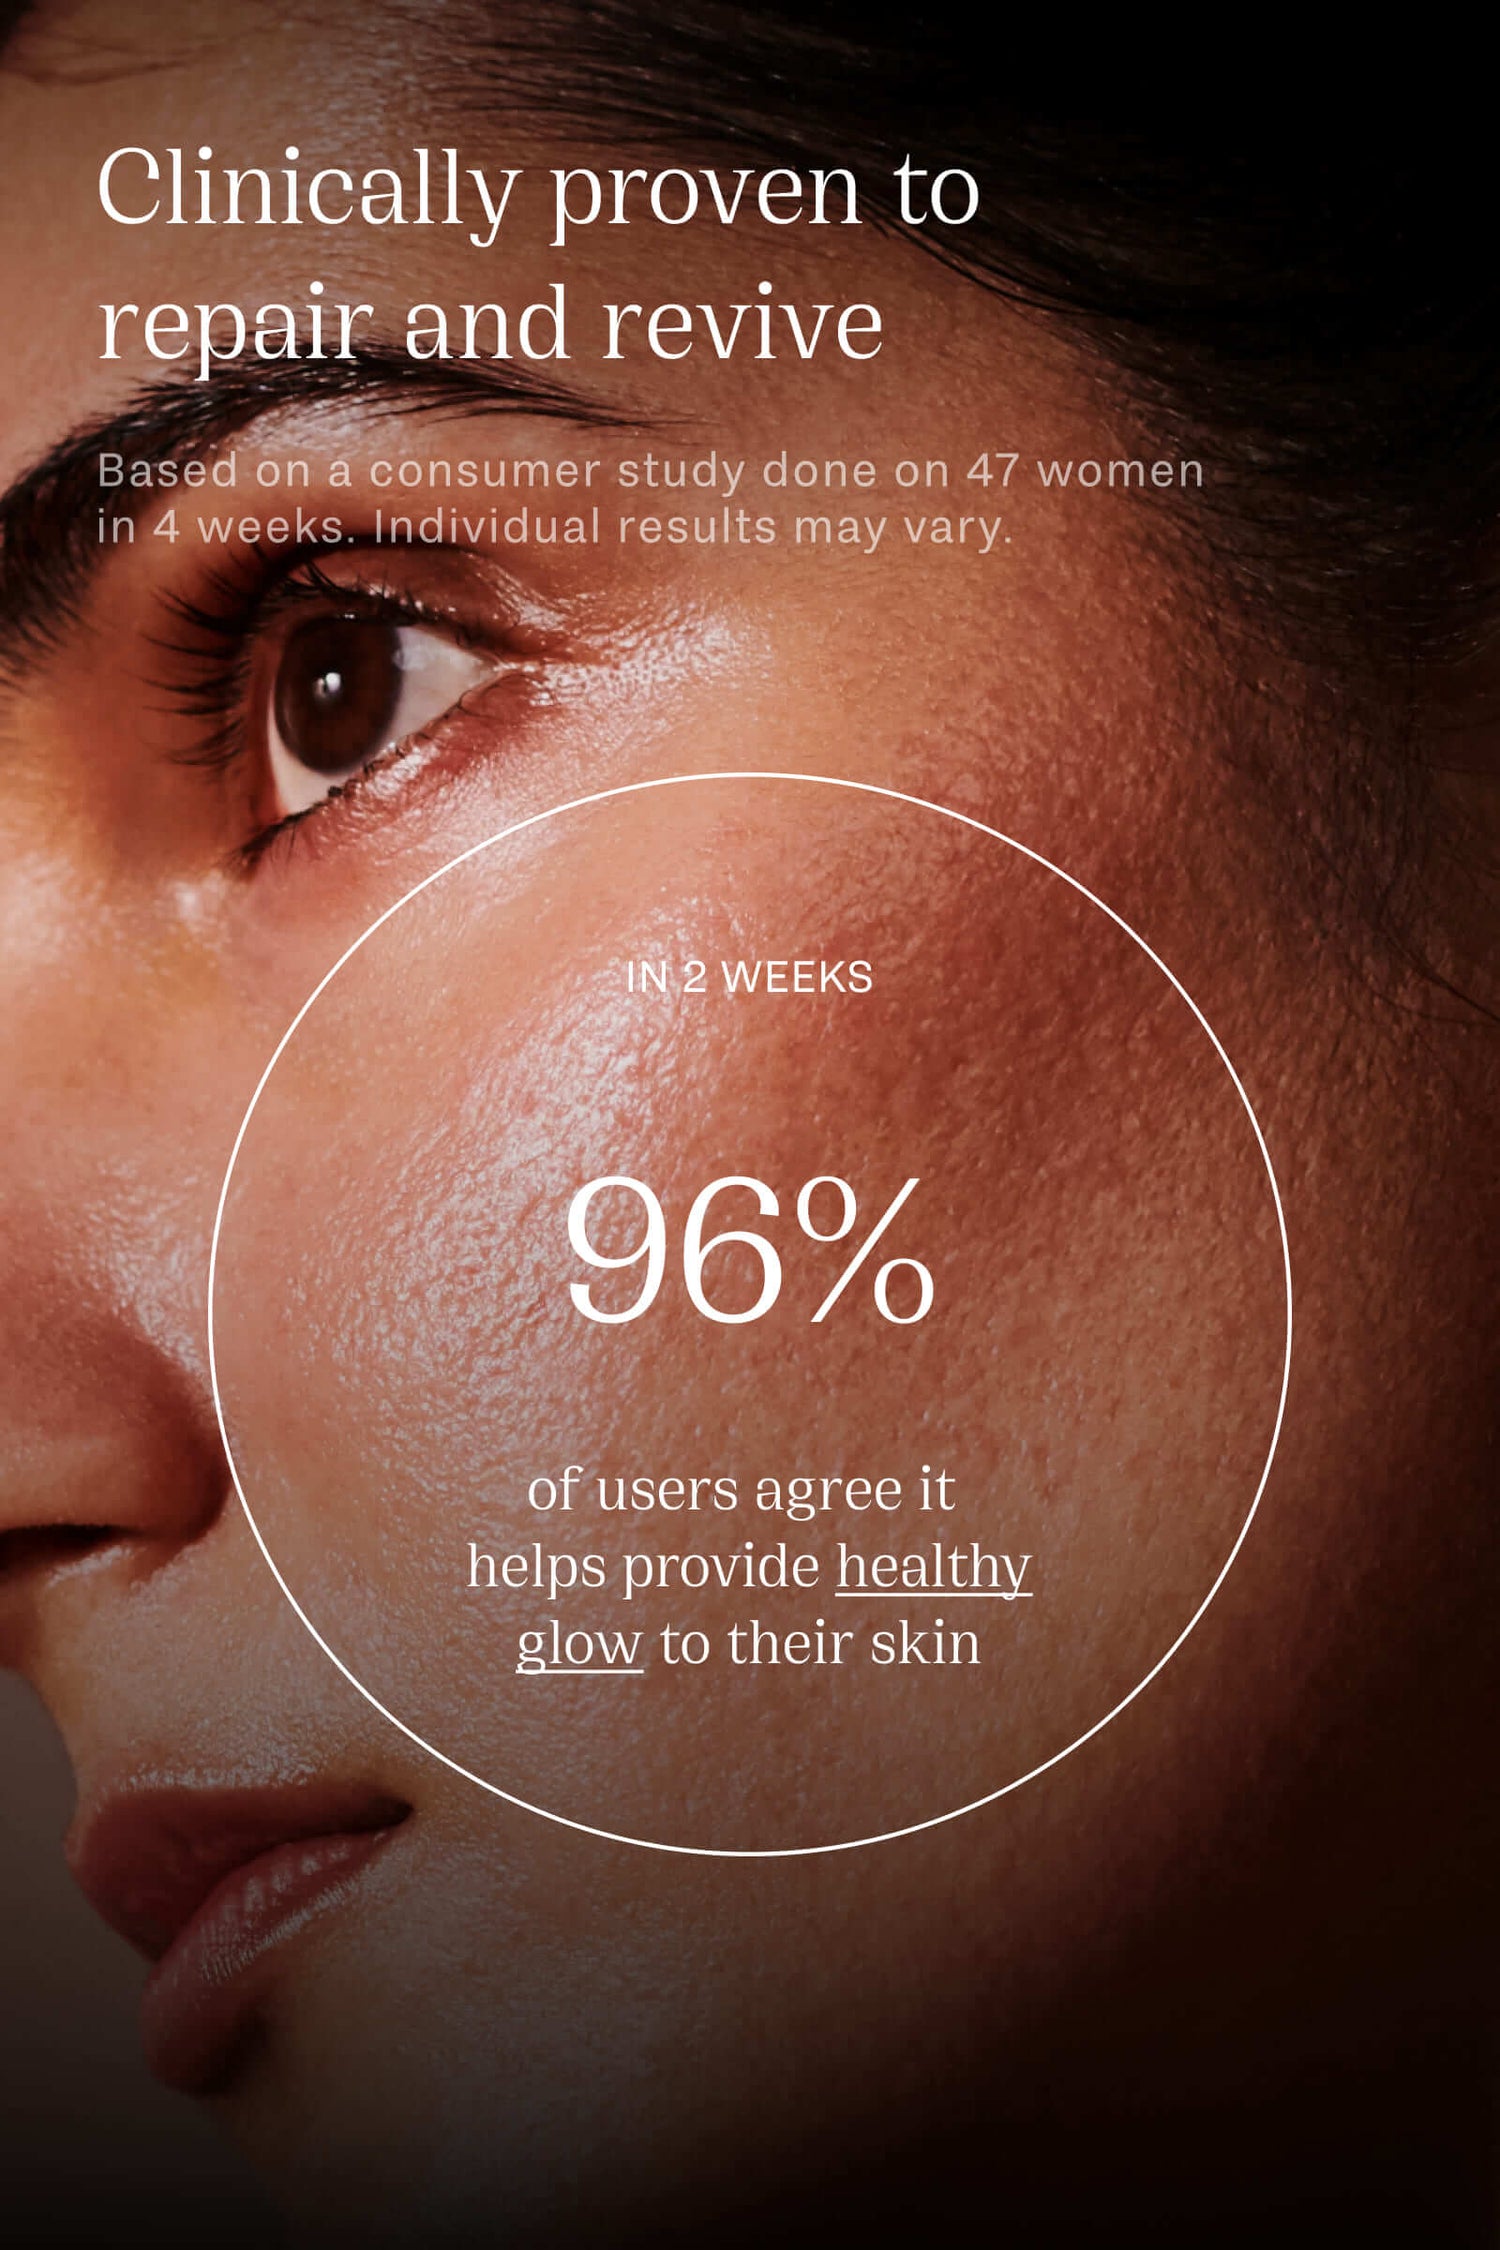 Clinically proven results in 2 weeks for Bakuchiol hydrating face oil